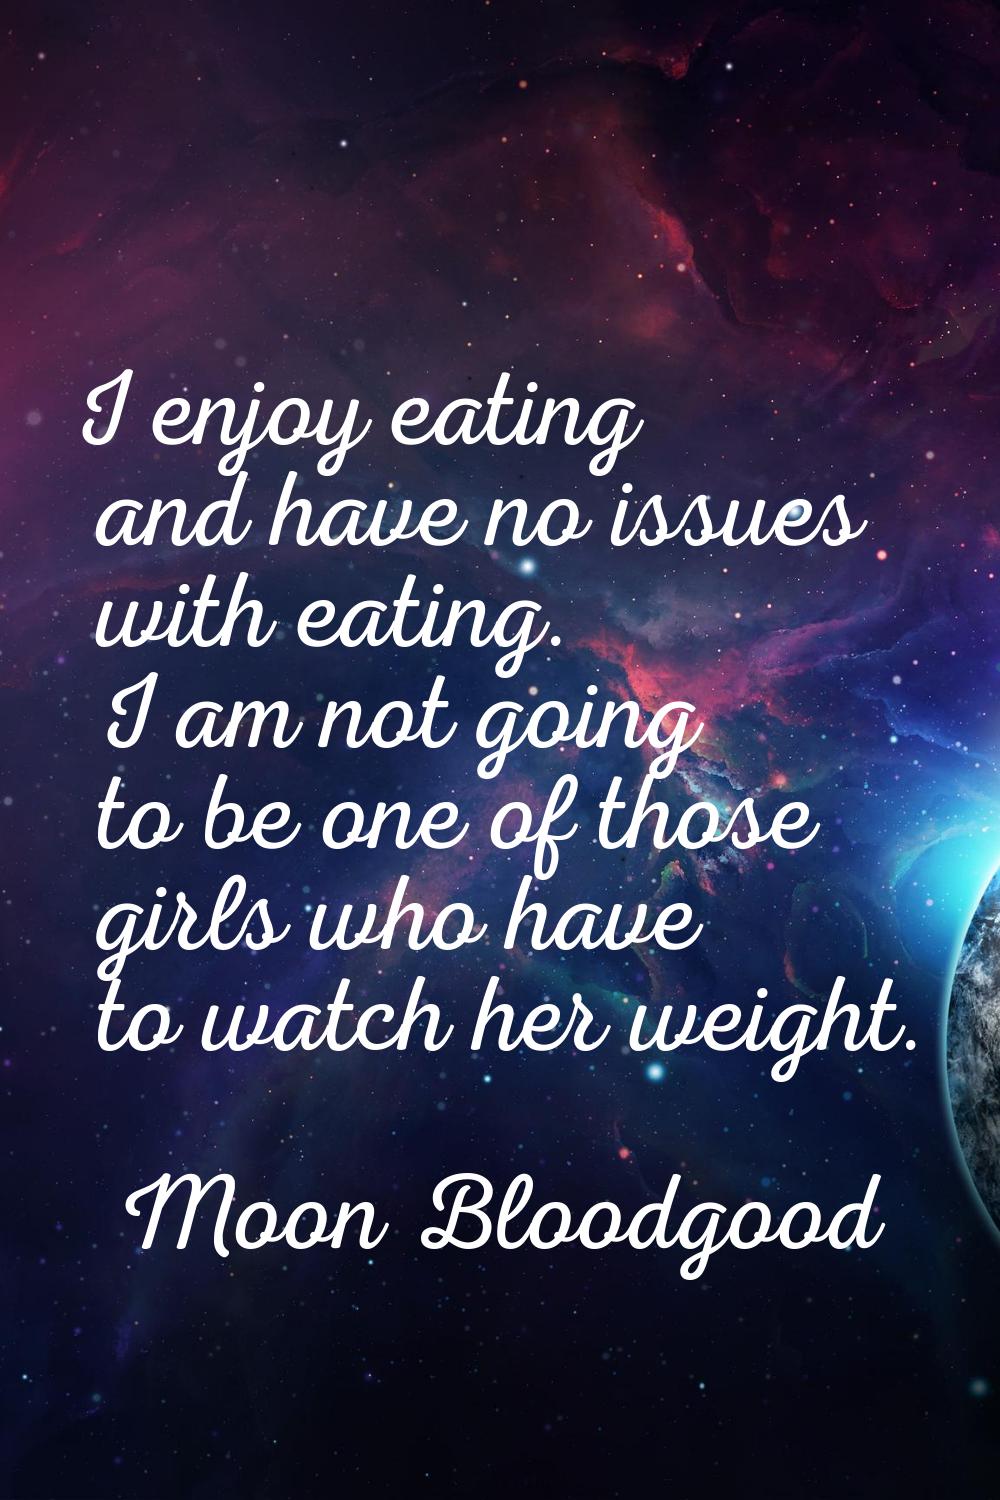 I enjoy eating and have no issues with eating. I am not going to be one of those girls who have to 